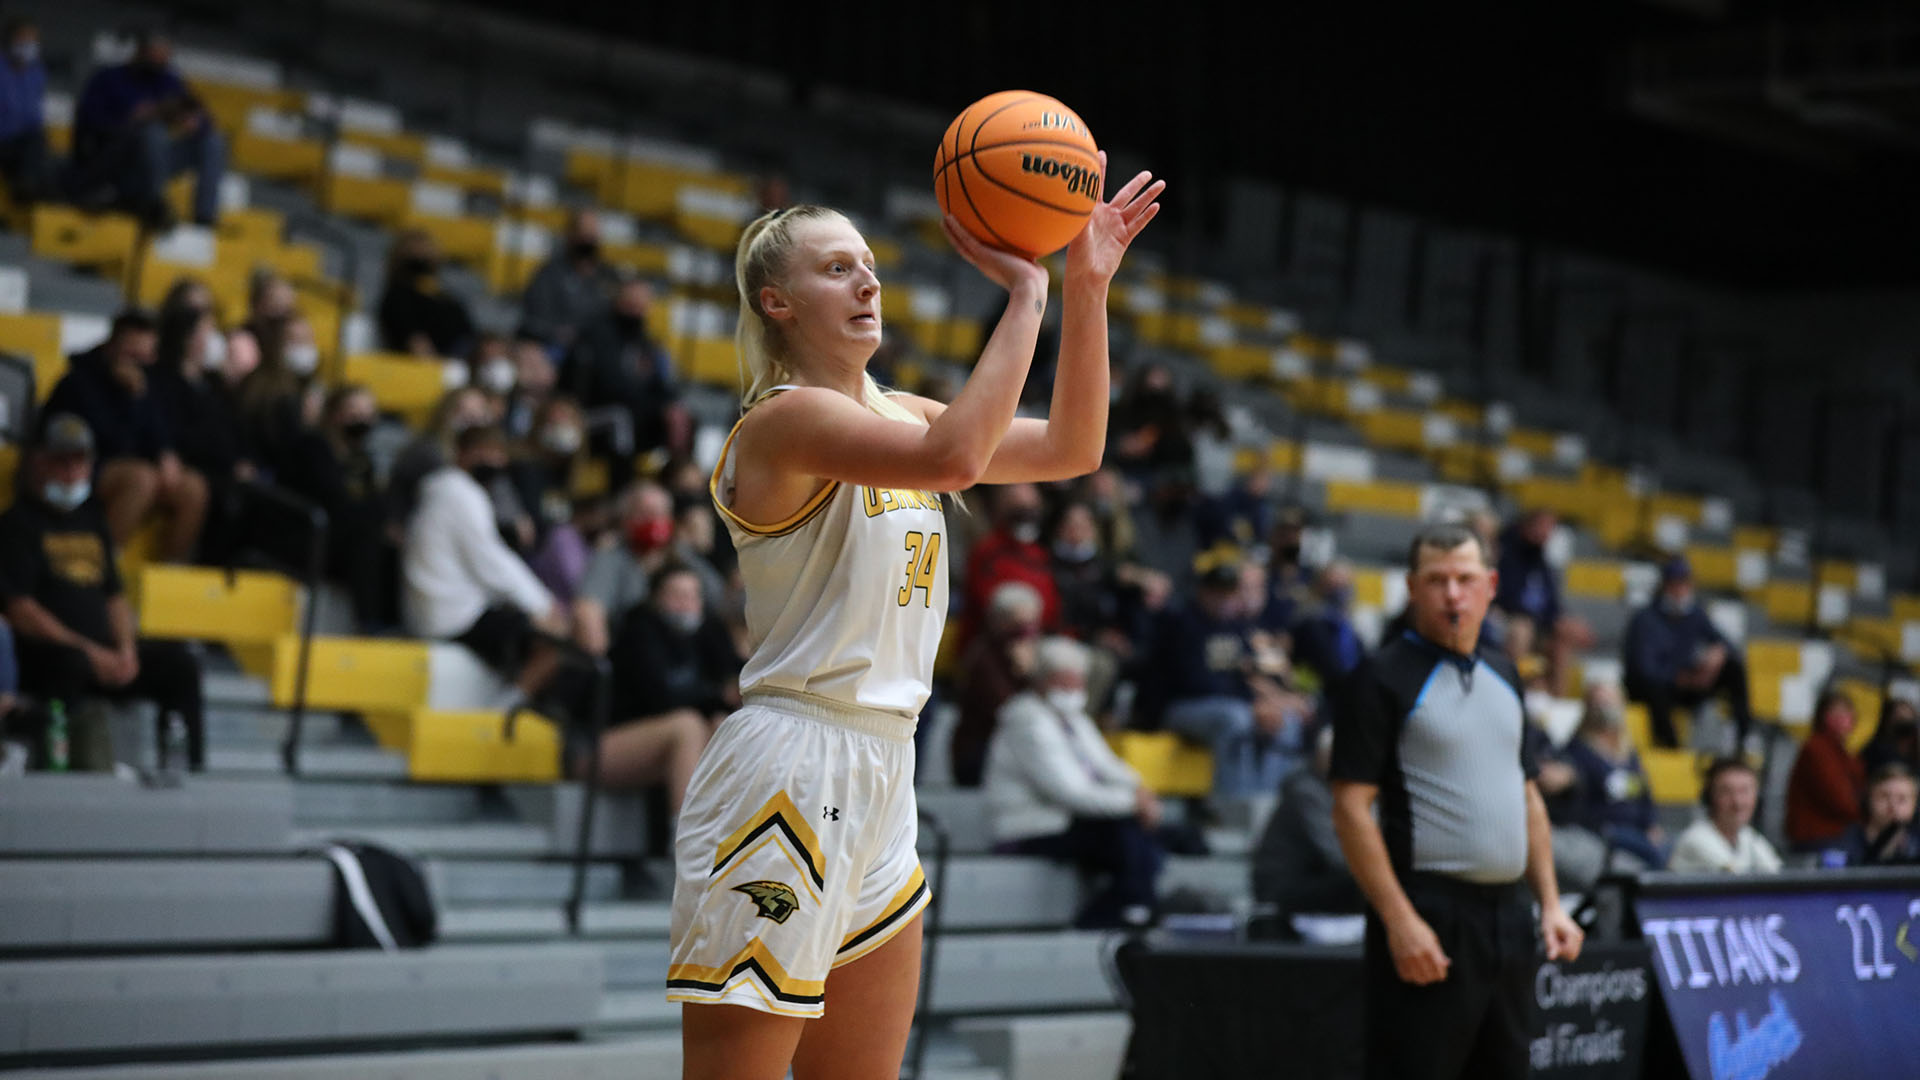 Kayce Vaile scored a career-high 11 points with six rebounds against the Muskies.